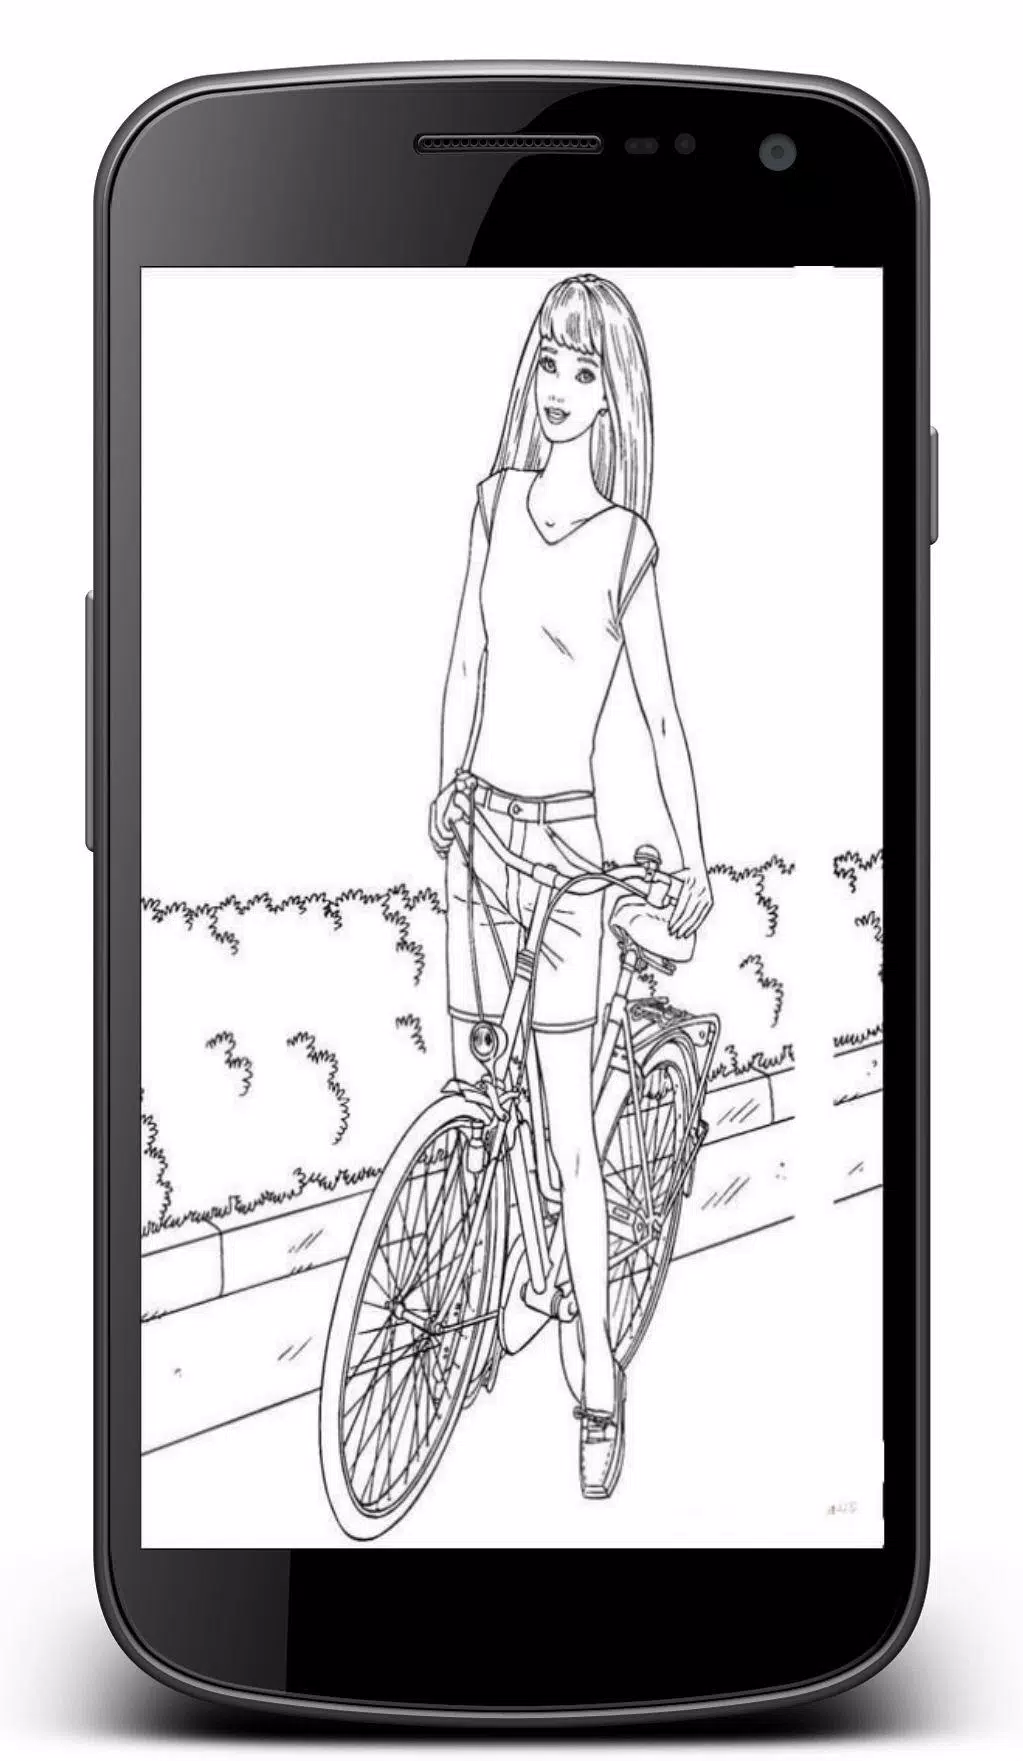 How To Color Barbie   Barbie Coloring Pages for Android   APK Download